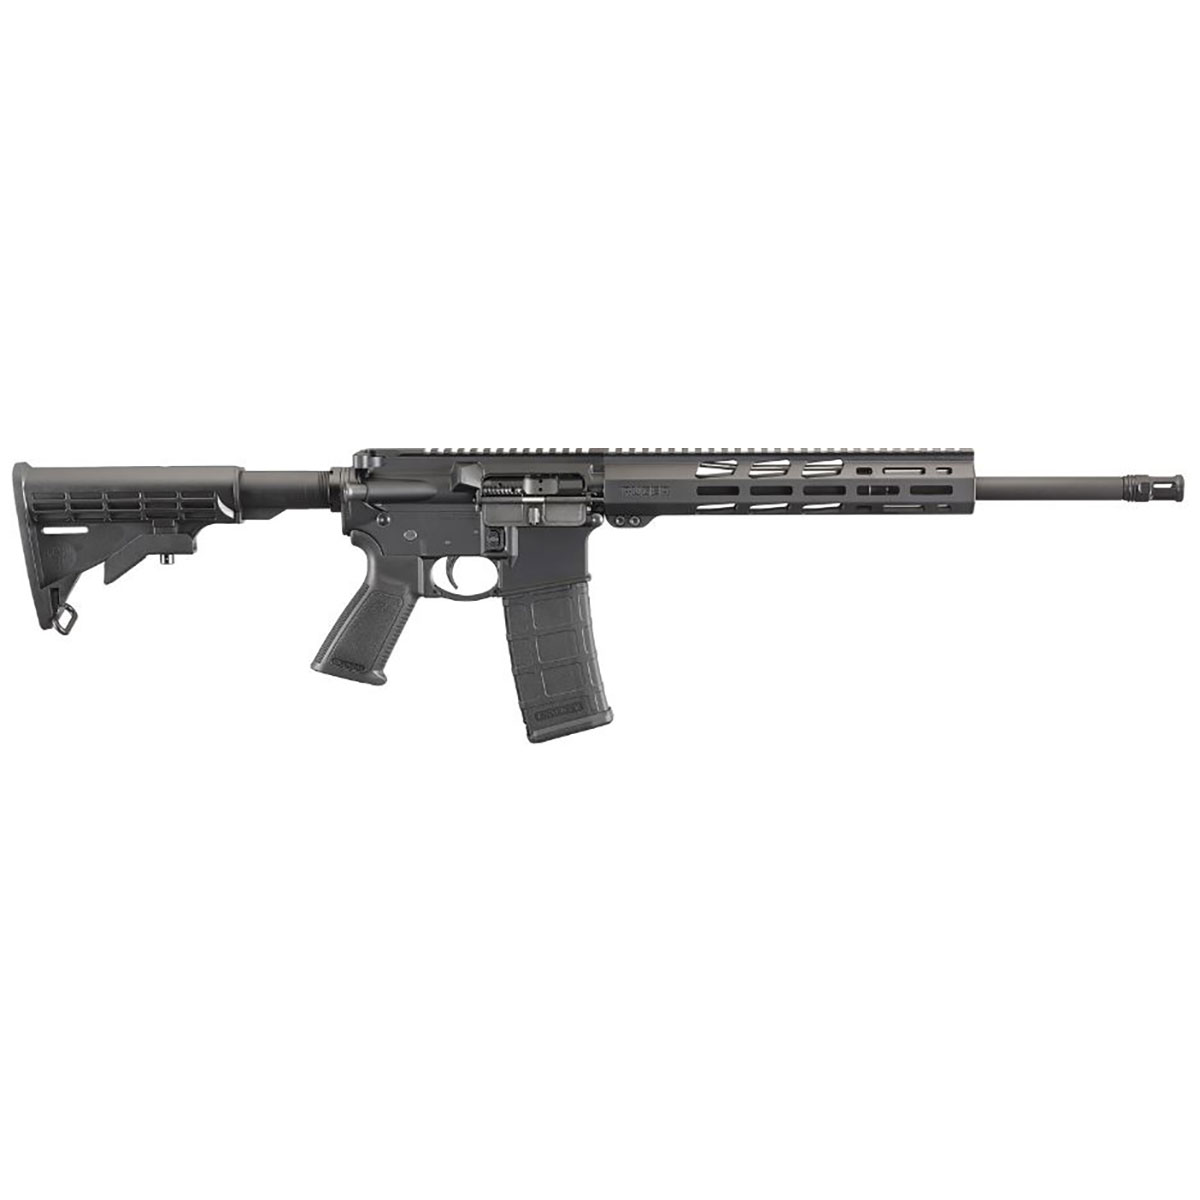 RUGER - AR-556 WITH FREE FLOAT HANGUARD 5.56X45 NATO SEMI-AUTO RIFLE